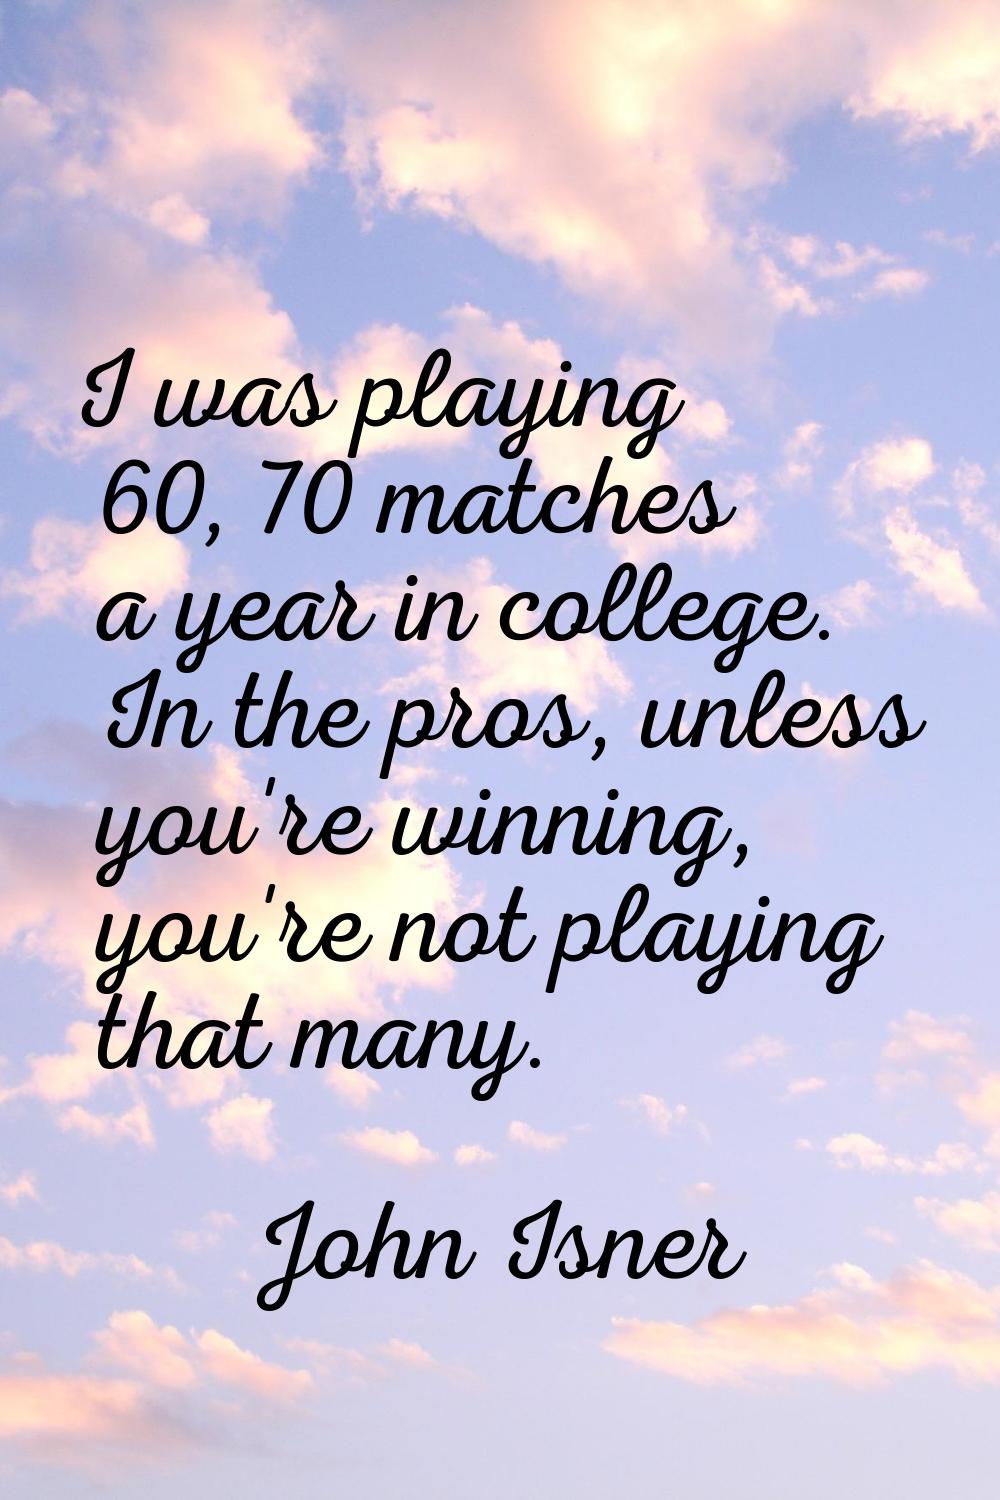 I was playing 60, 70 matches a year in college. In the pros, unless you're winning, you're not play